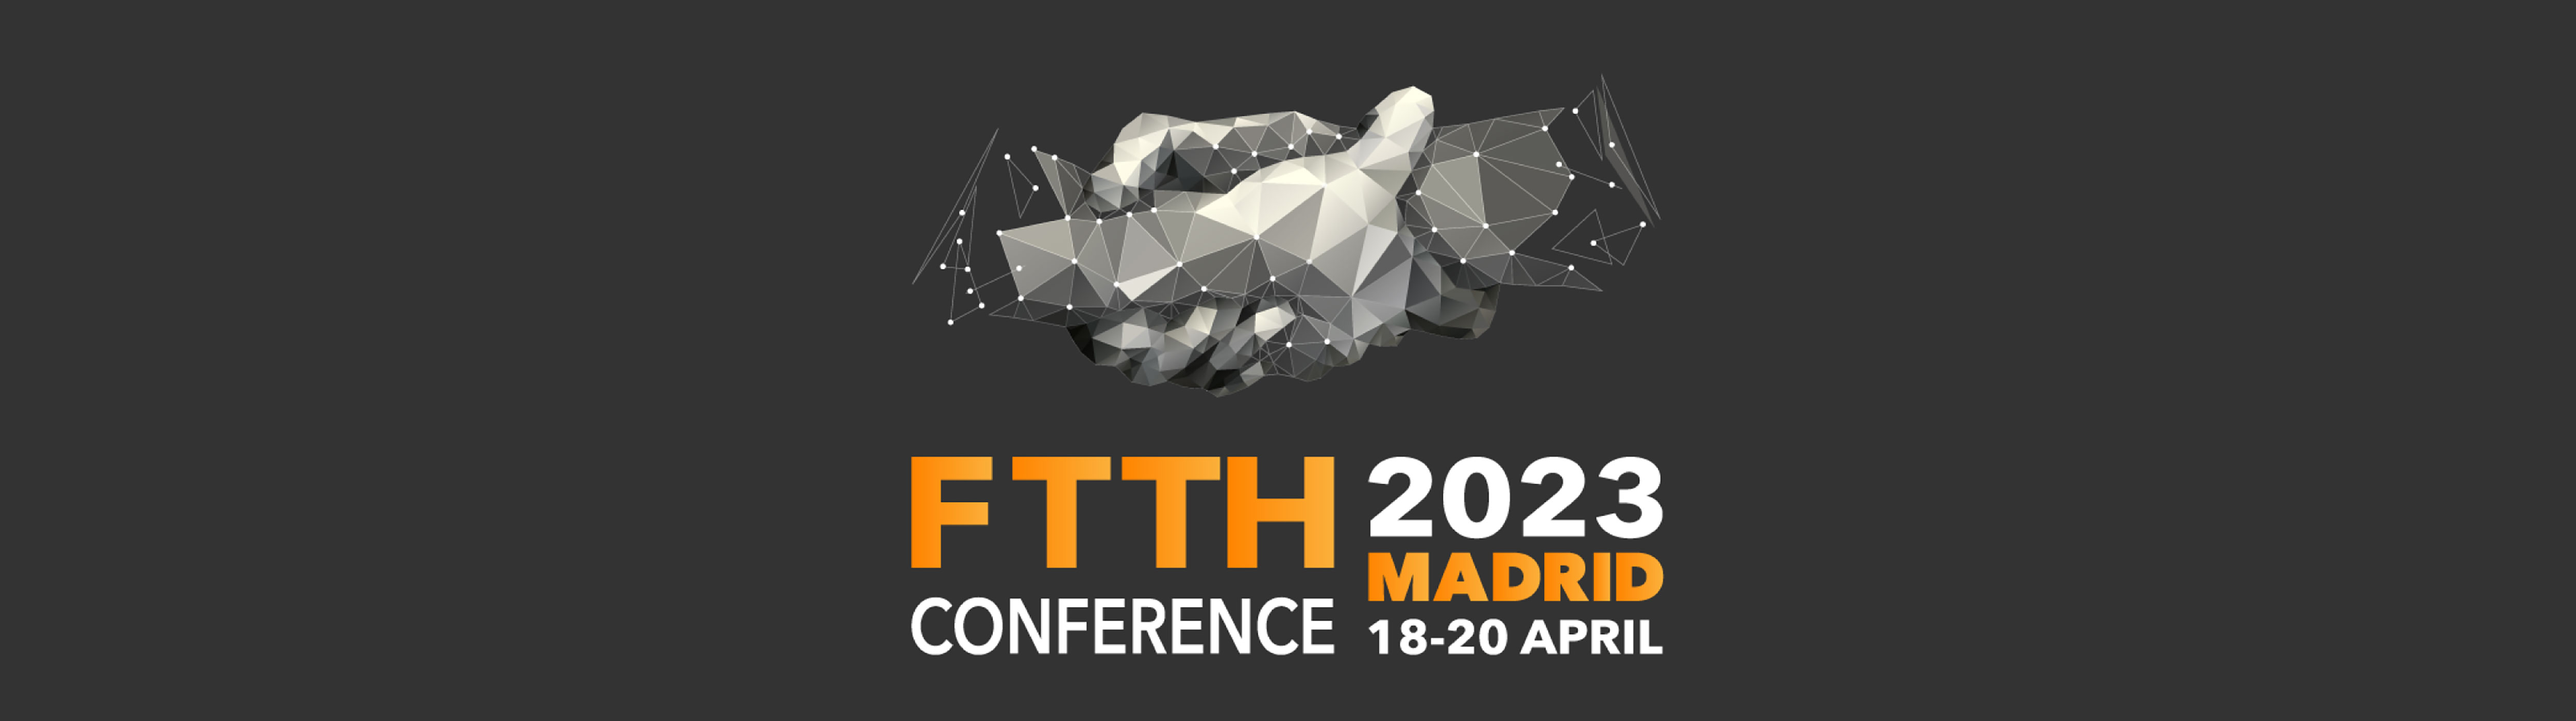 FTTH Conference 2023 Net.Fit Tierre Group